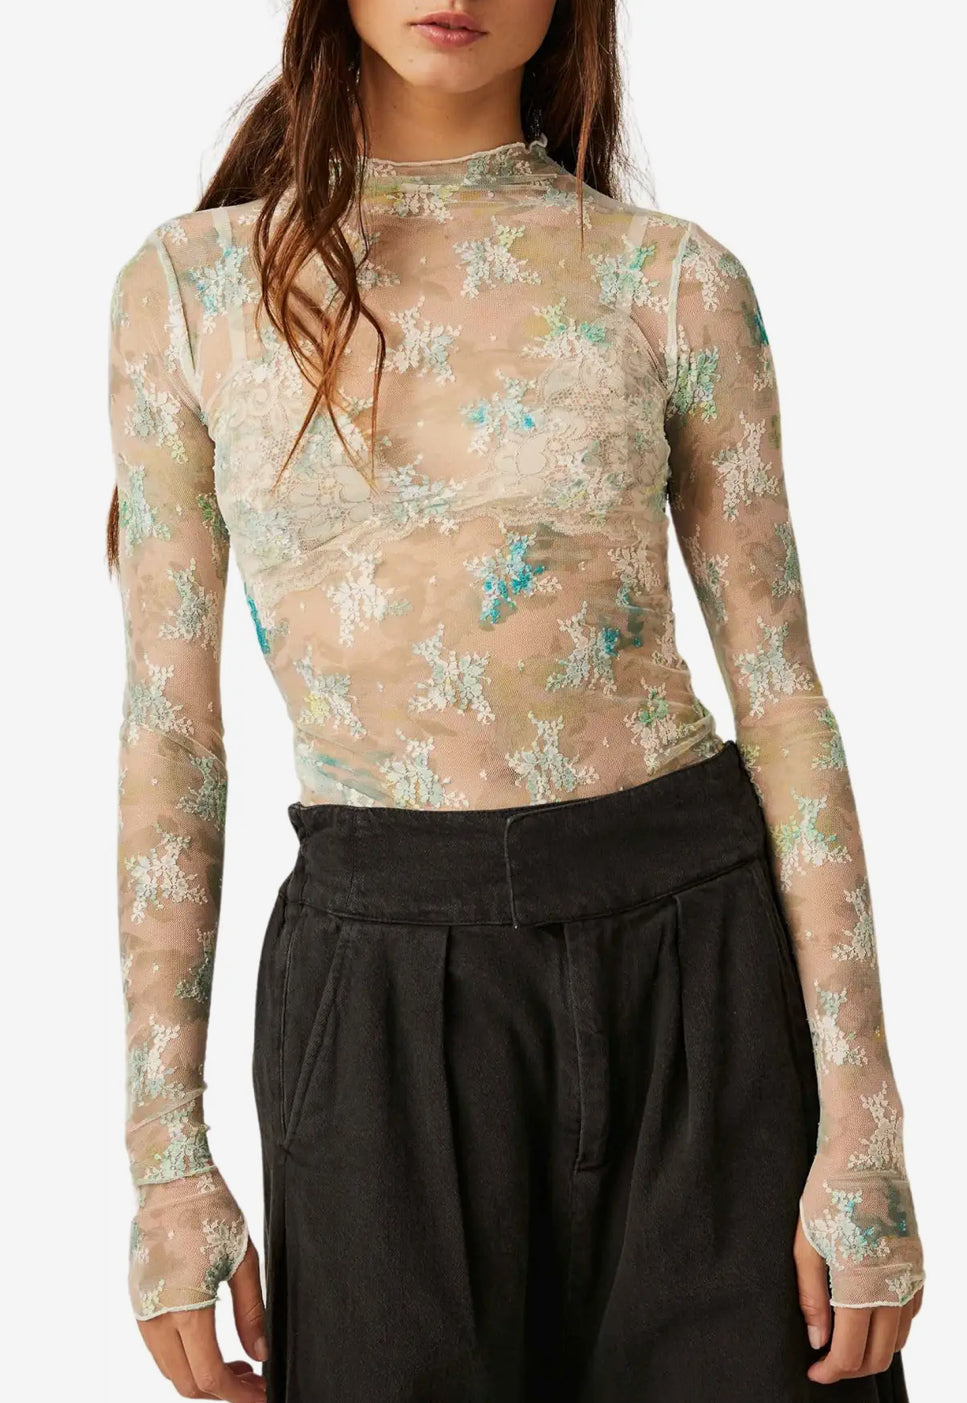 Lady Lux Printed Layering Top